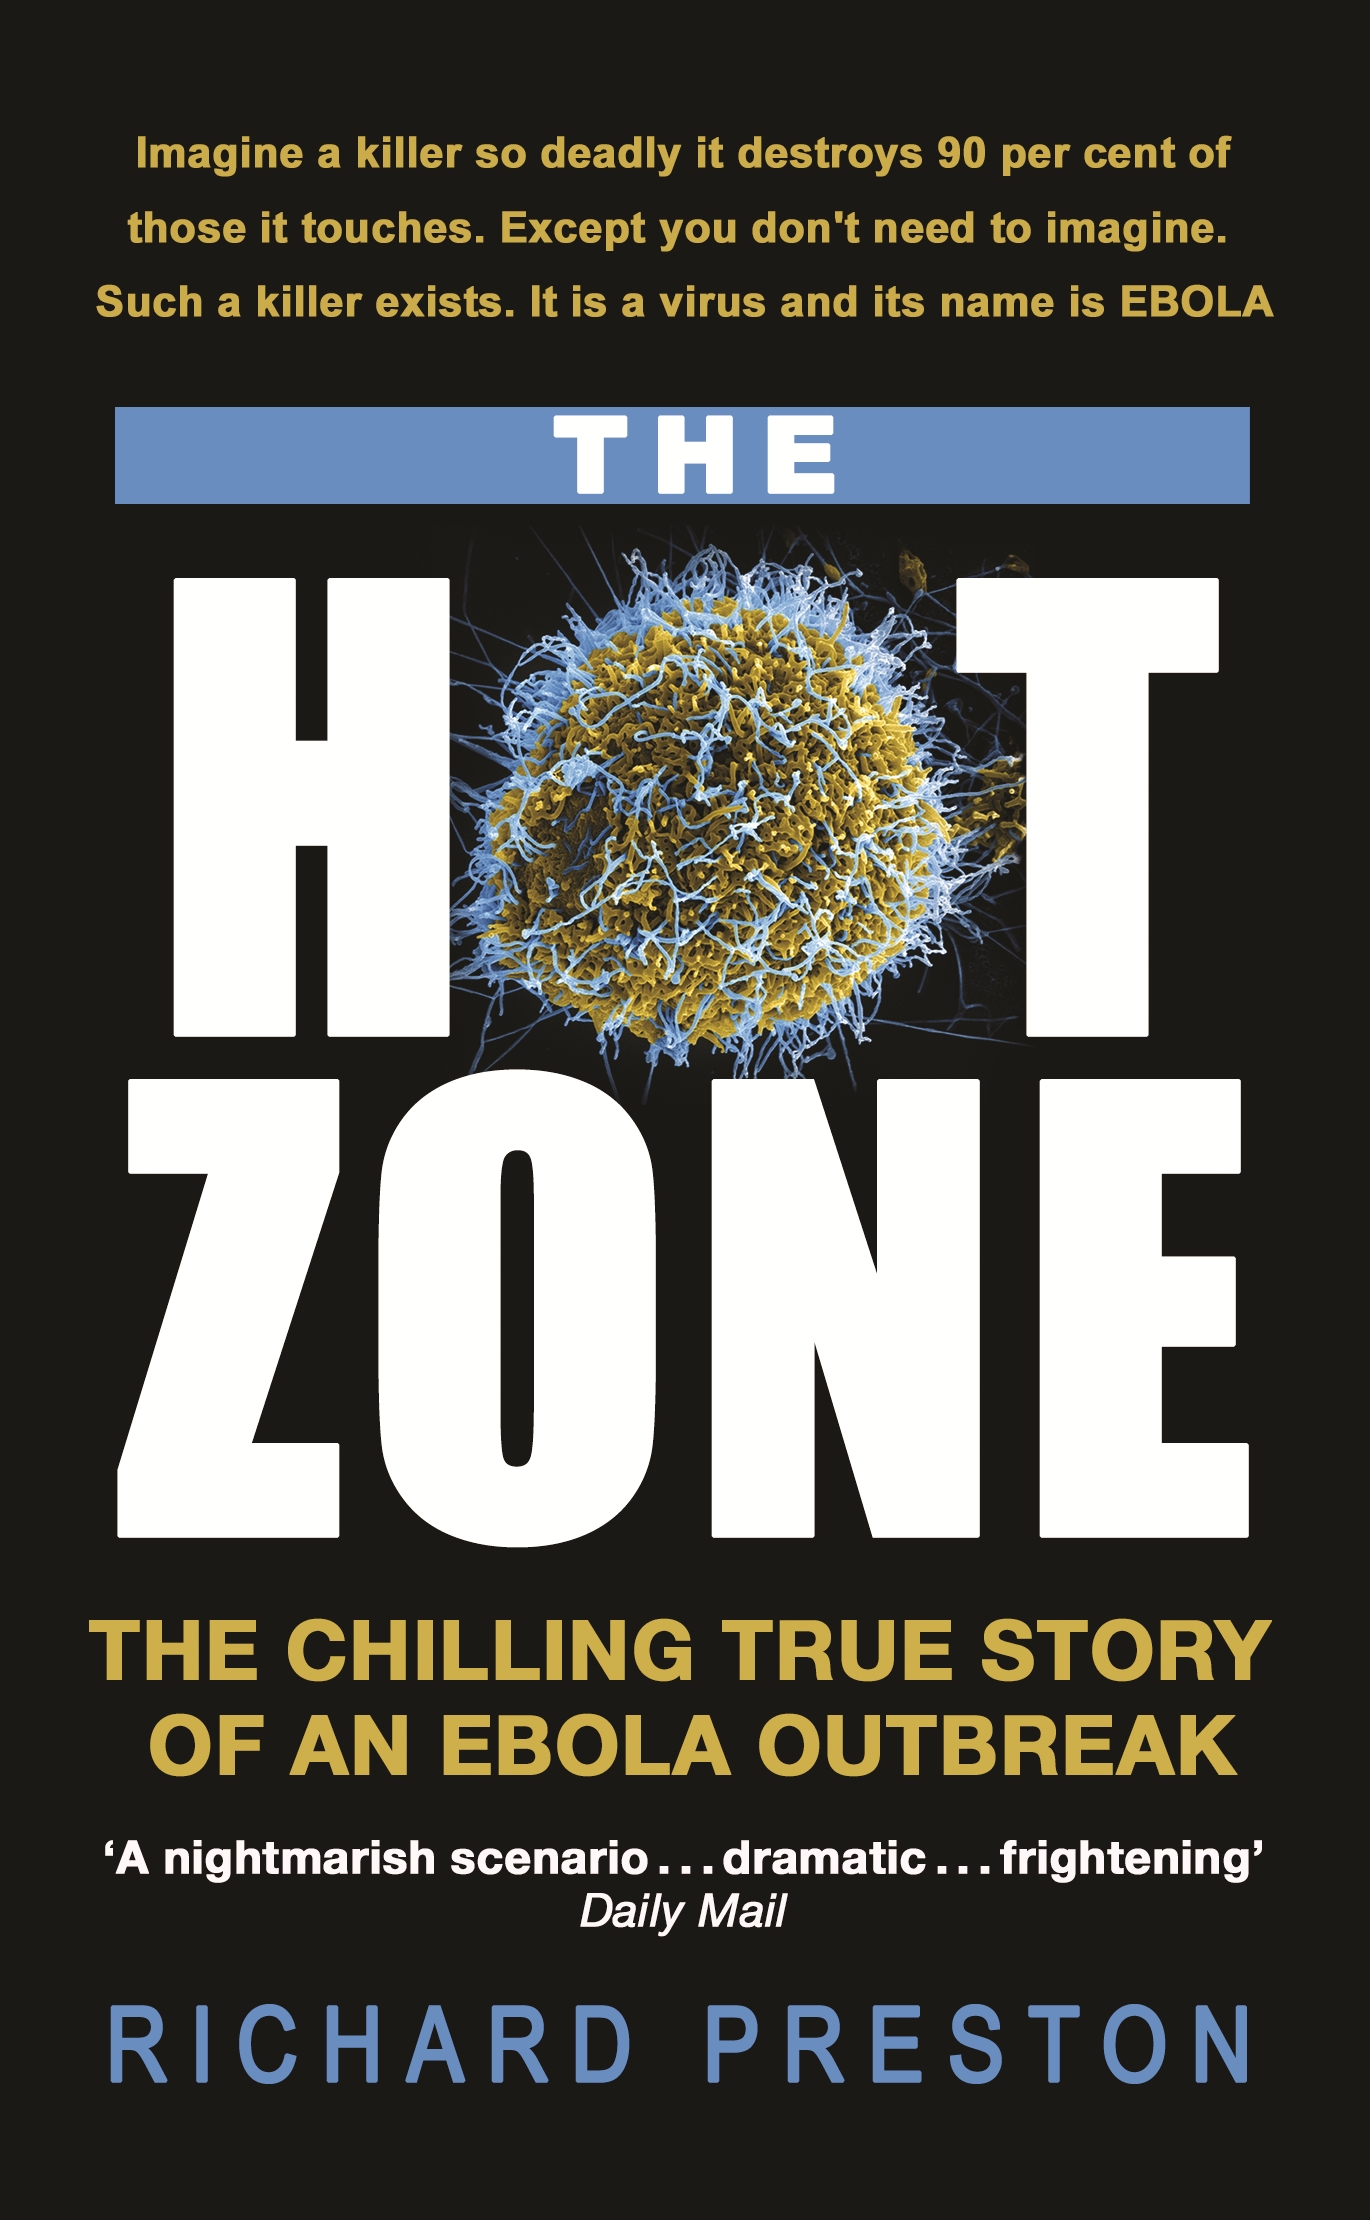 Personal Narrative: The Hot Zone